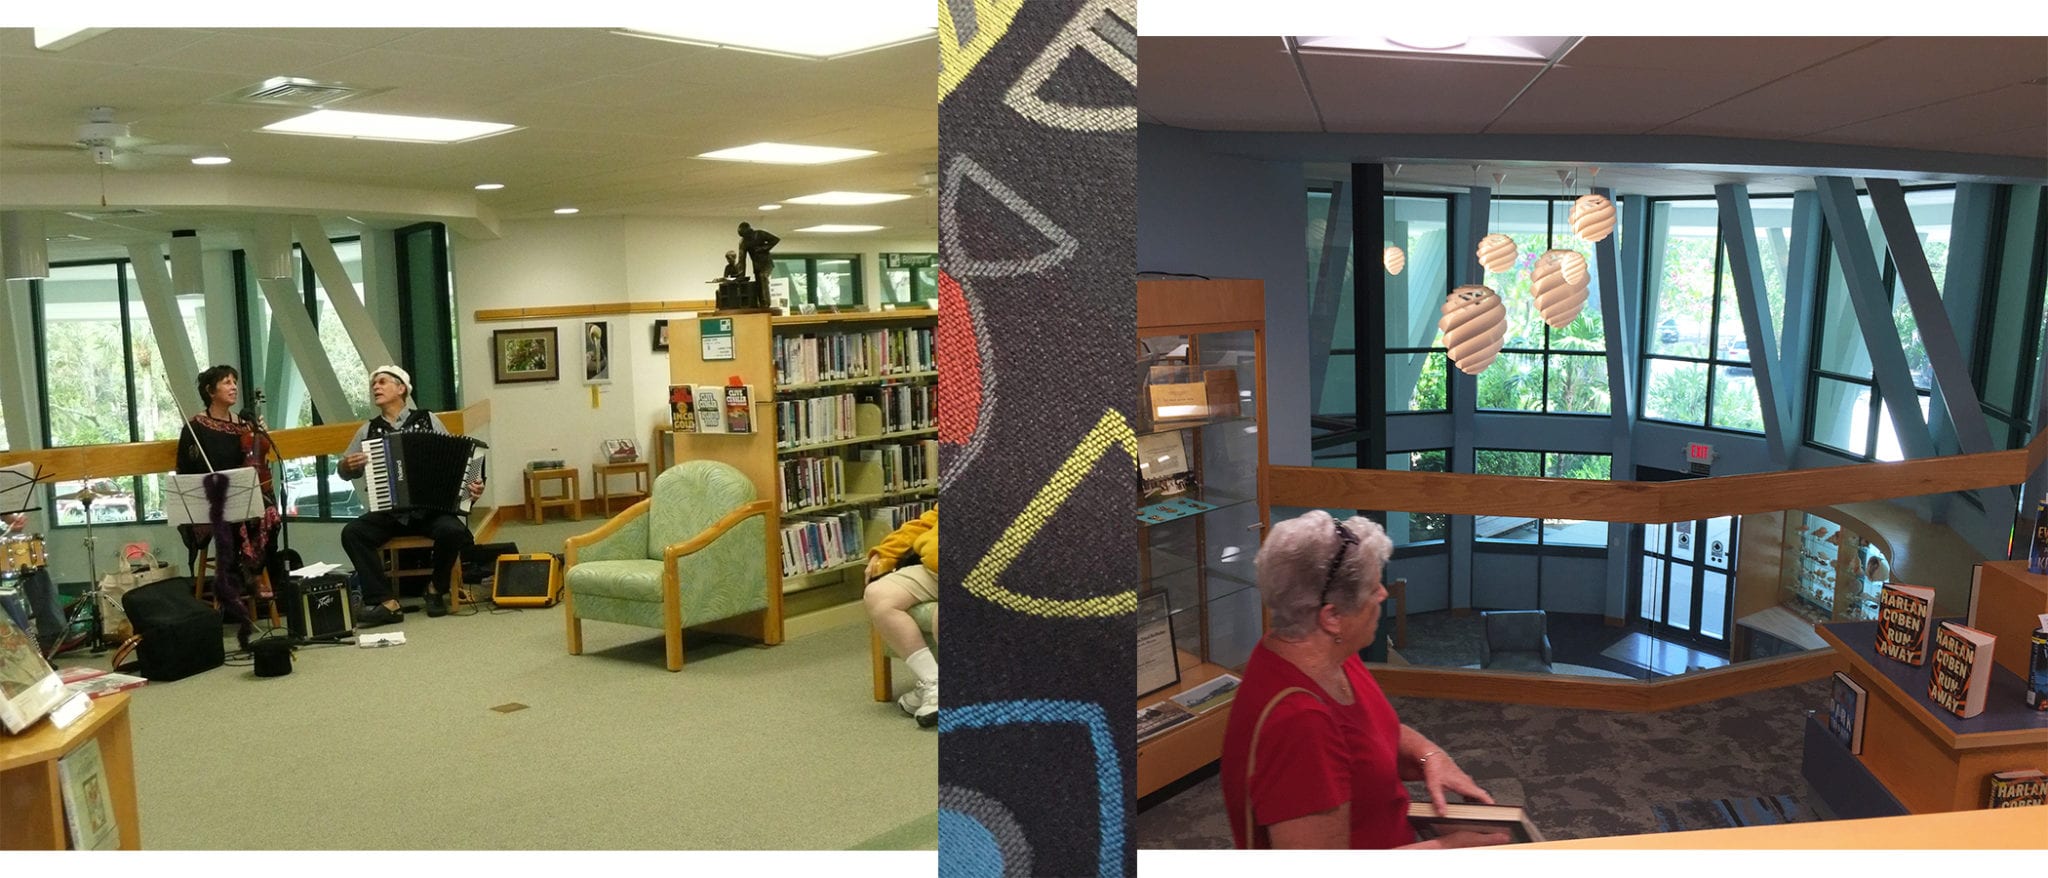 Your Library Reimagined – Before and After, scroll down for more photos |  Sanibel Public Library